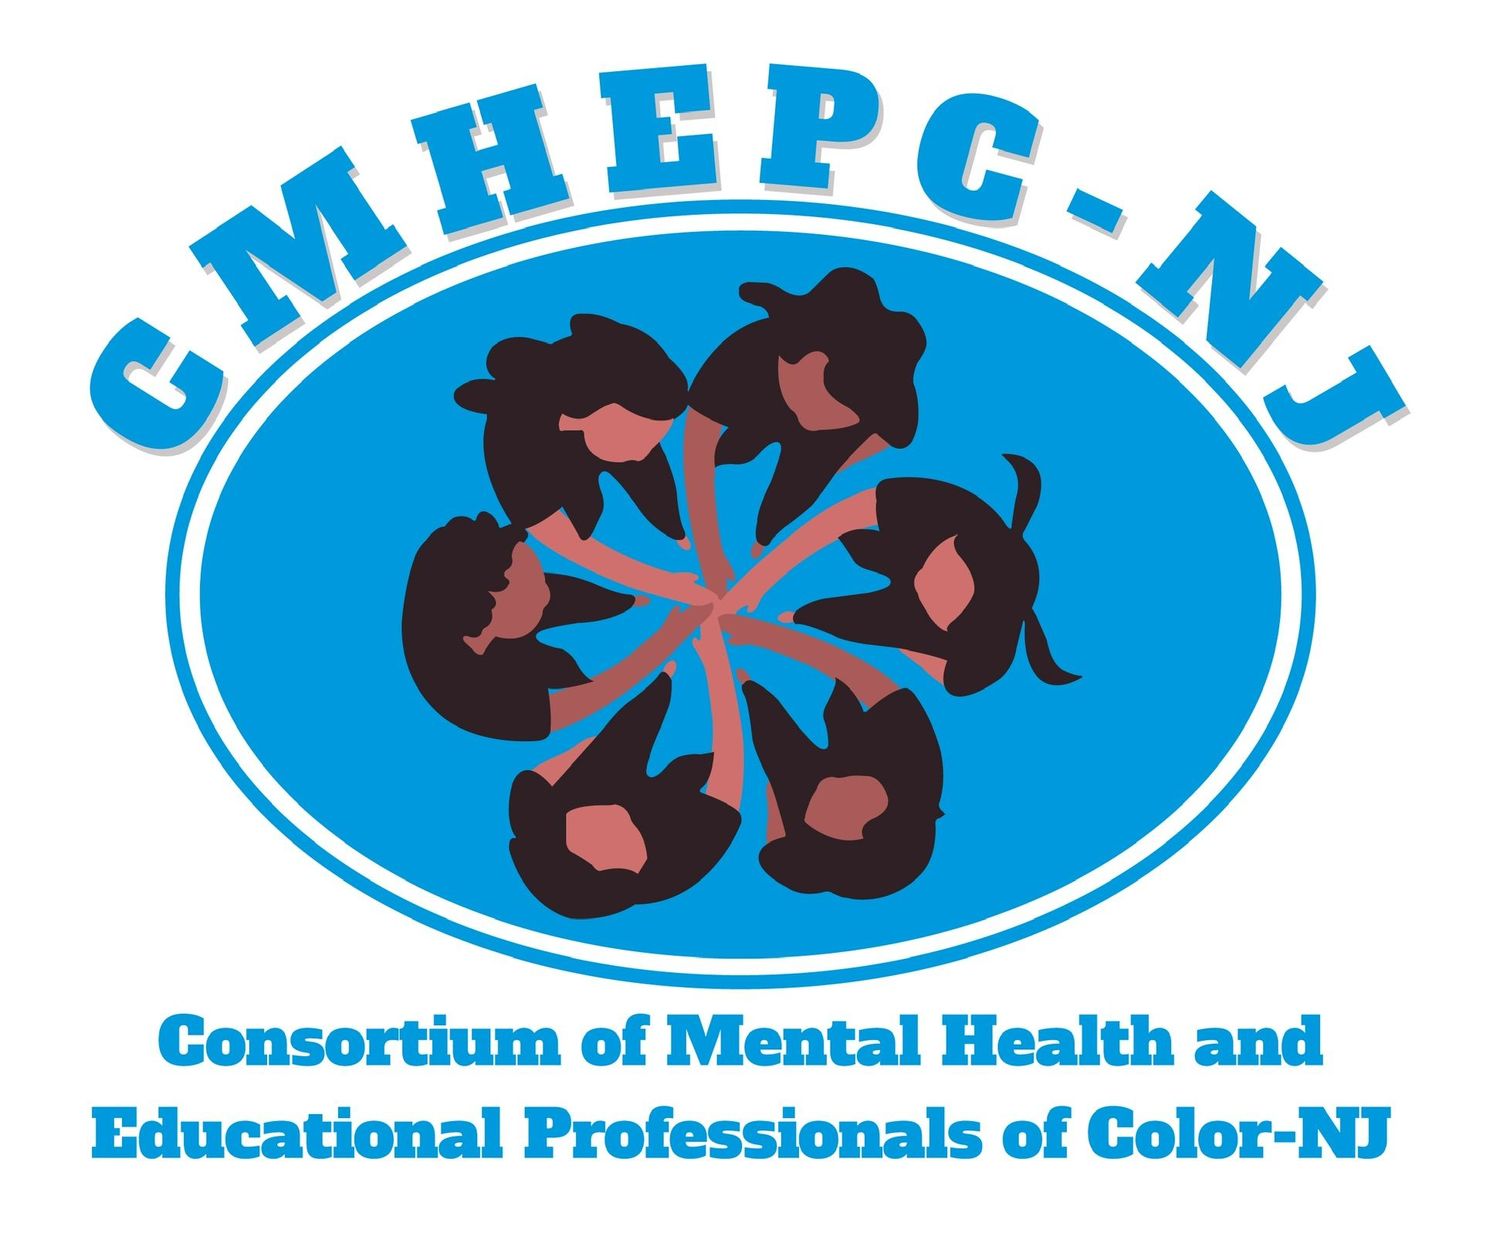 Gallery Photo of Consortium of Mental Heath and Educational Professionals of Color-NJ